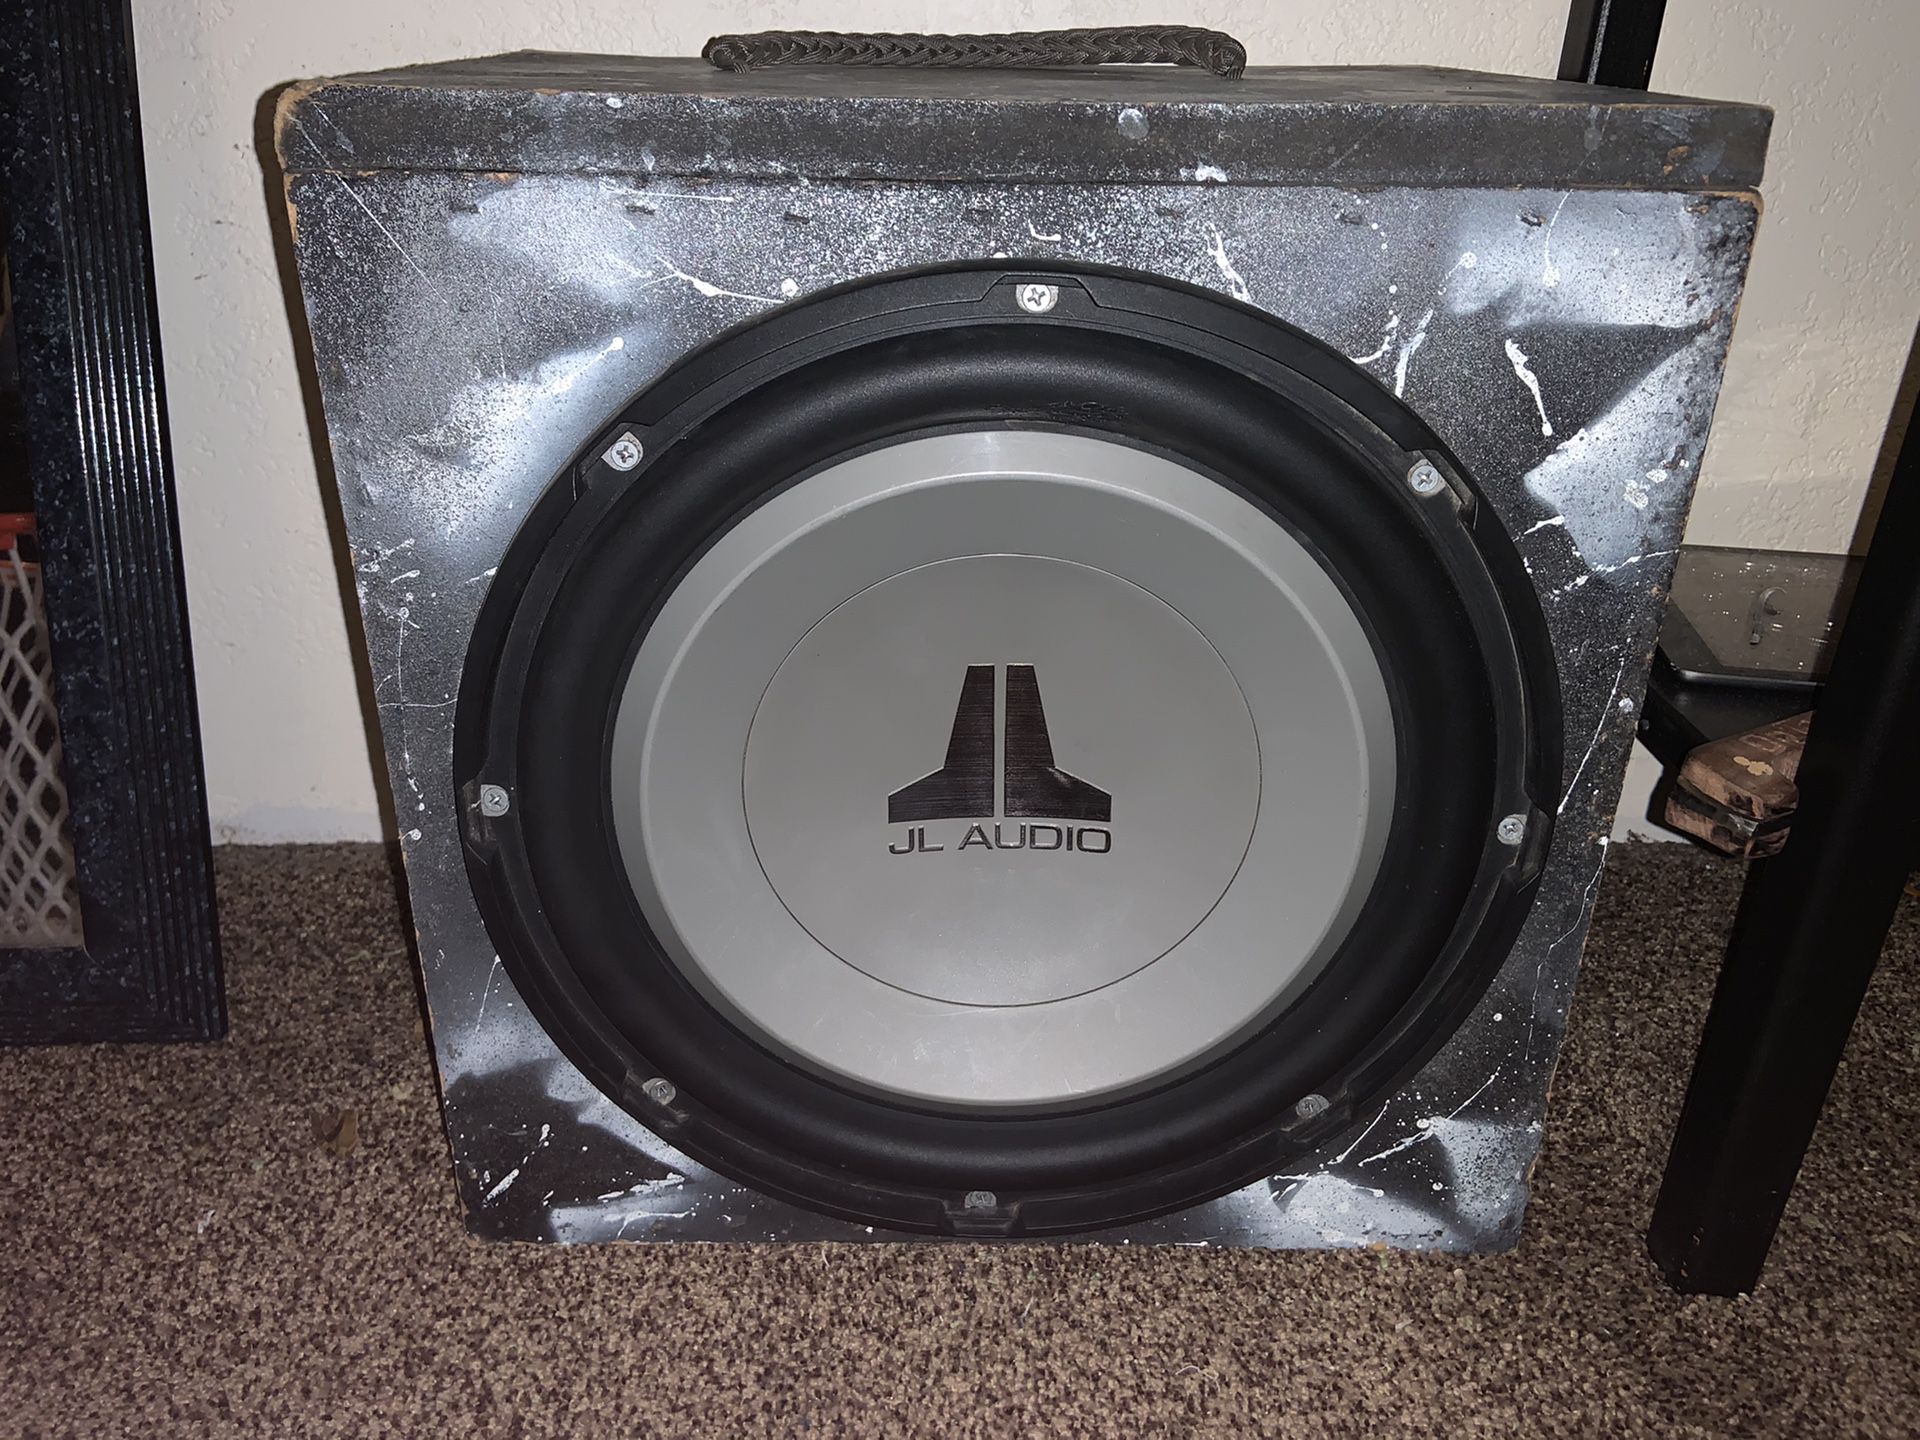 JL audio 13.5” subwoofer with box